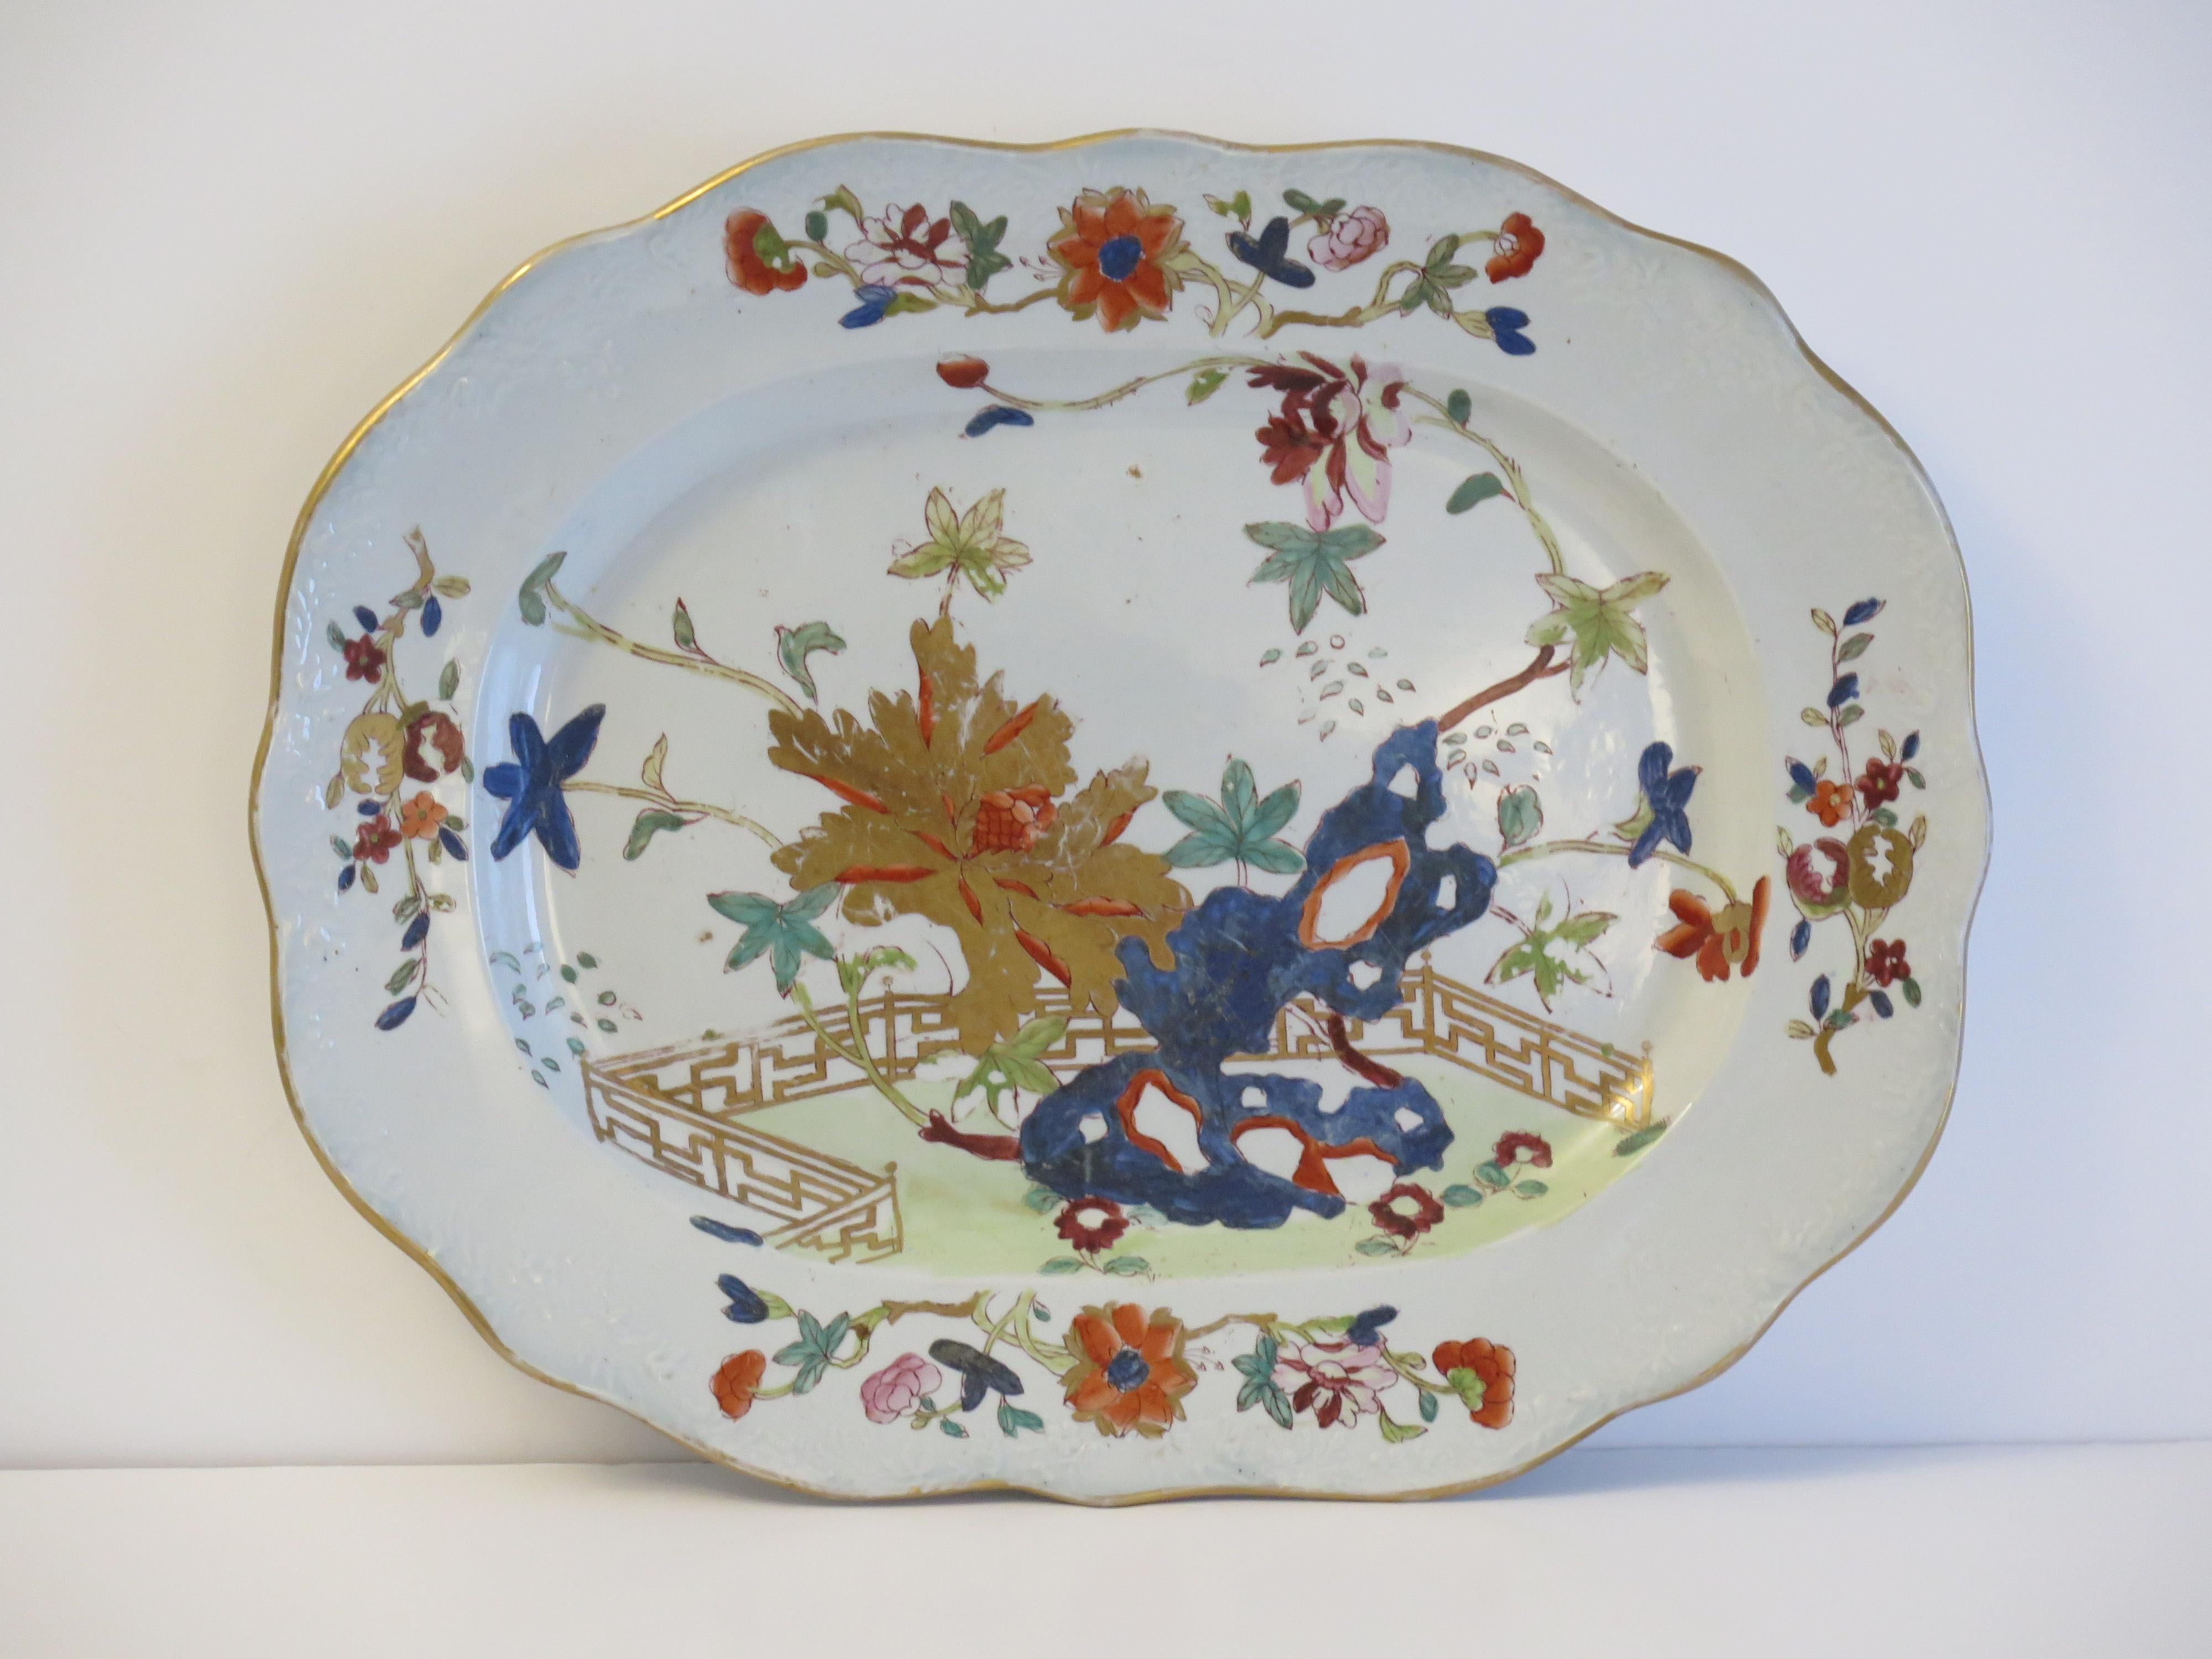 This is a very good hand painted Mason's ironstone large Platter or Meat Plate, in the Fence, Rock and Tree gilded pattern, from their earliest George III rd period, circa 1818.

This is a large platter of 